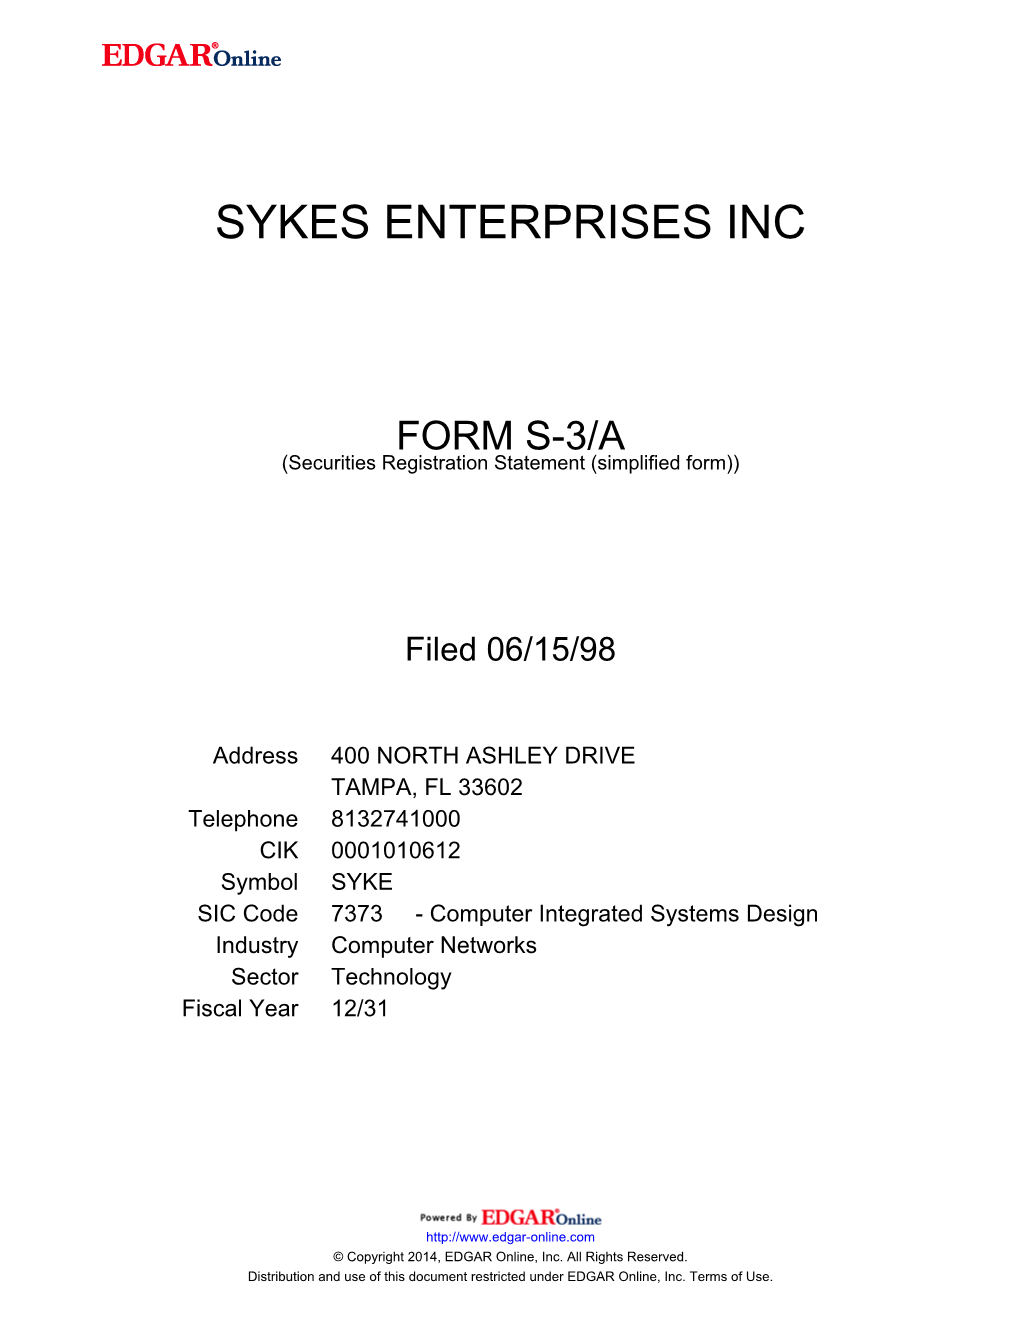 SYKES ENTERPRISES, INCORPORATED (Exact Name of Registrant As Specified in Its Charter)